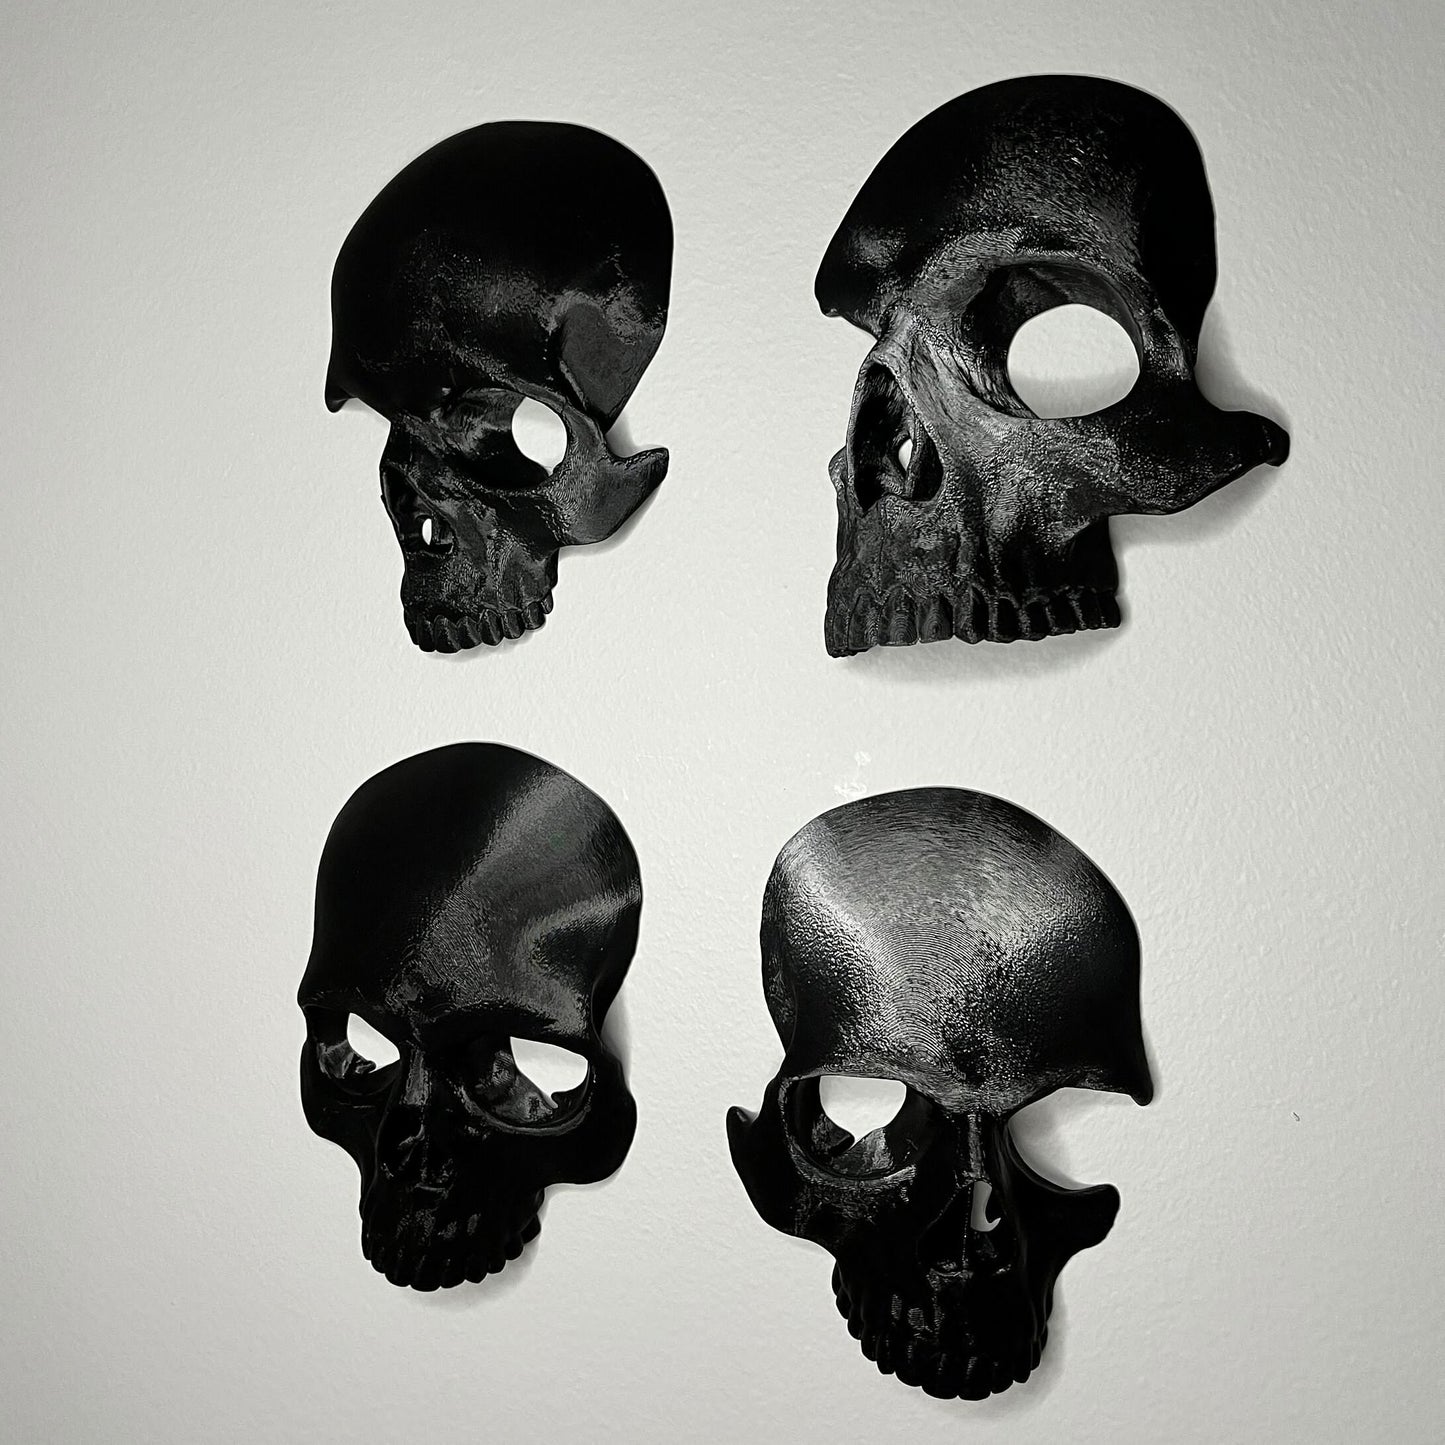 Skull Art | Gothic Wall Decor | 4 Piece - Squee Prints